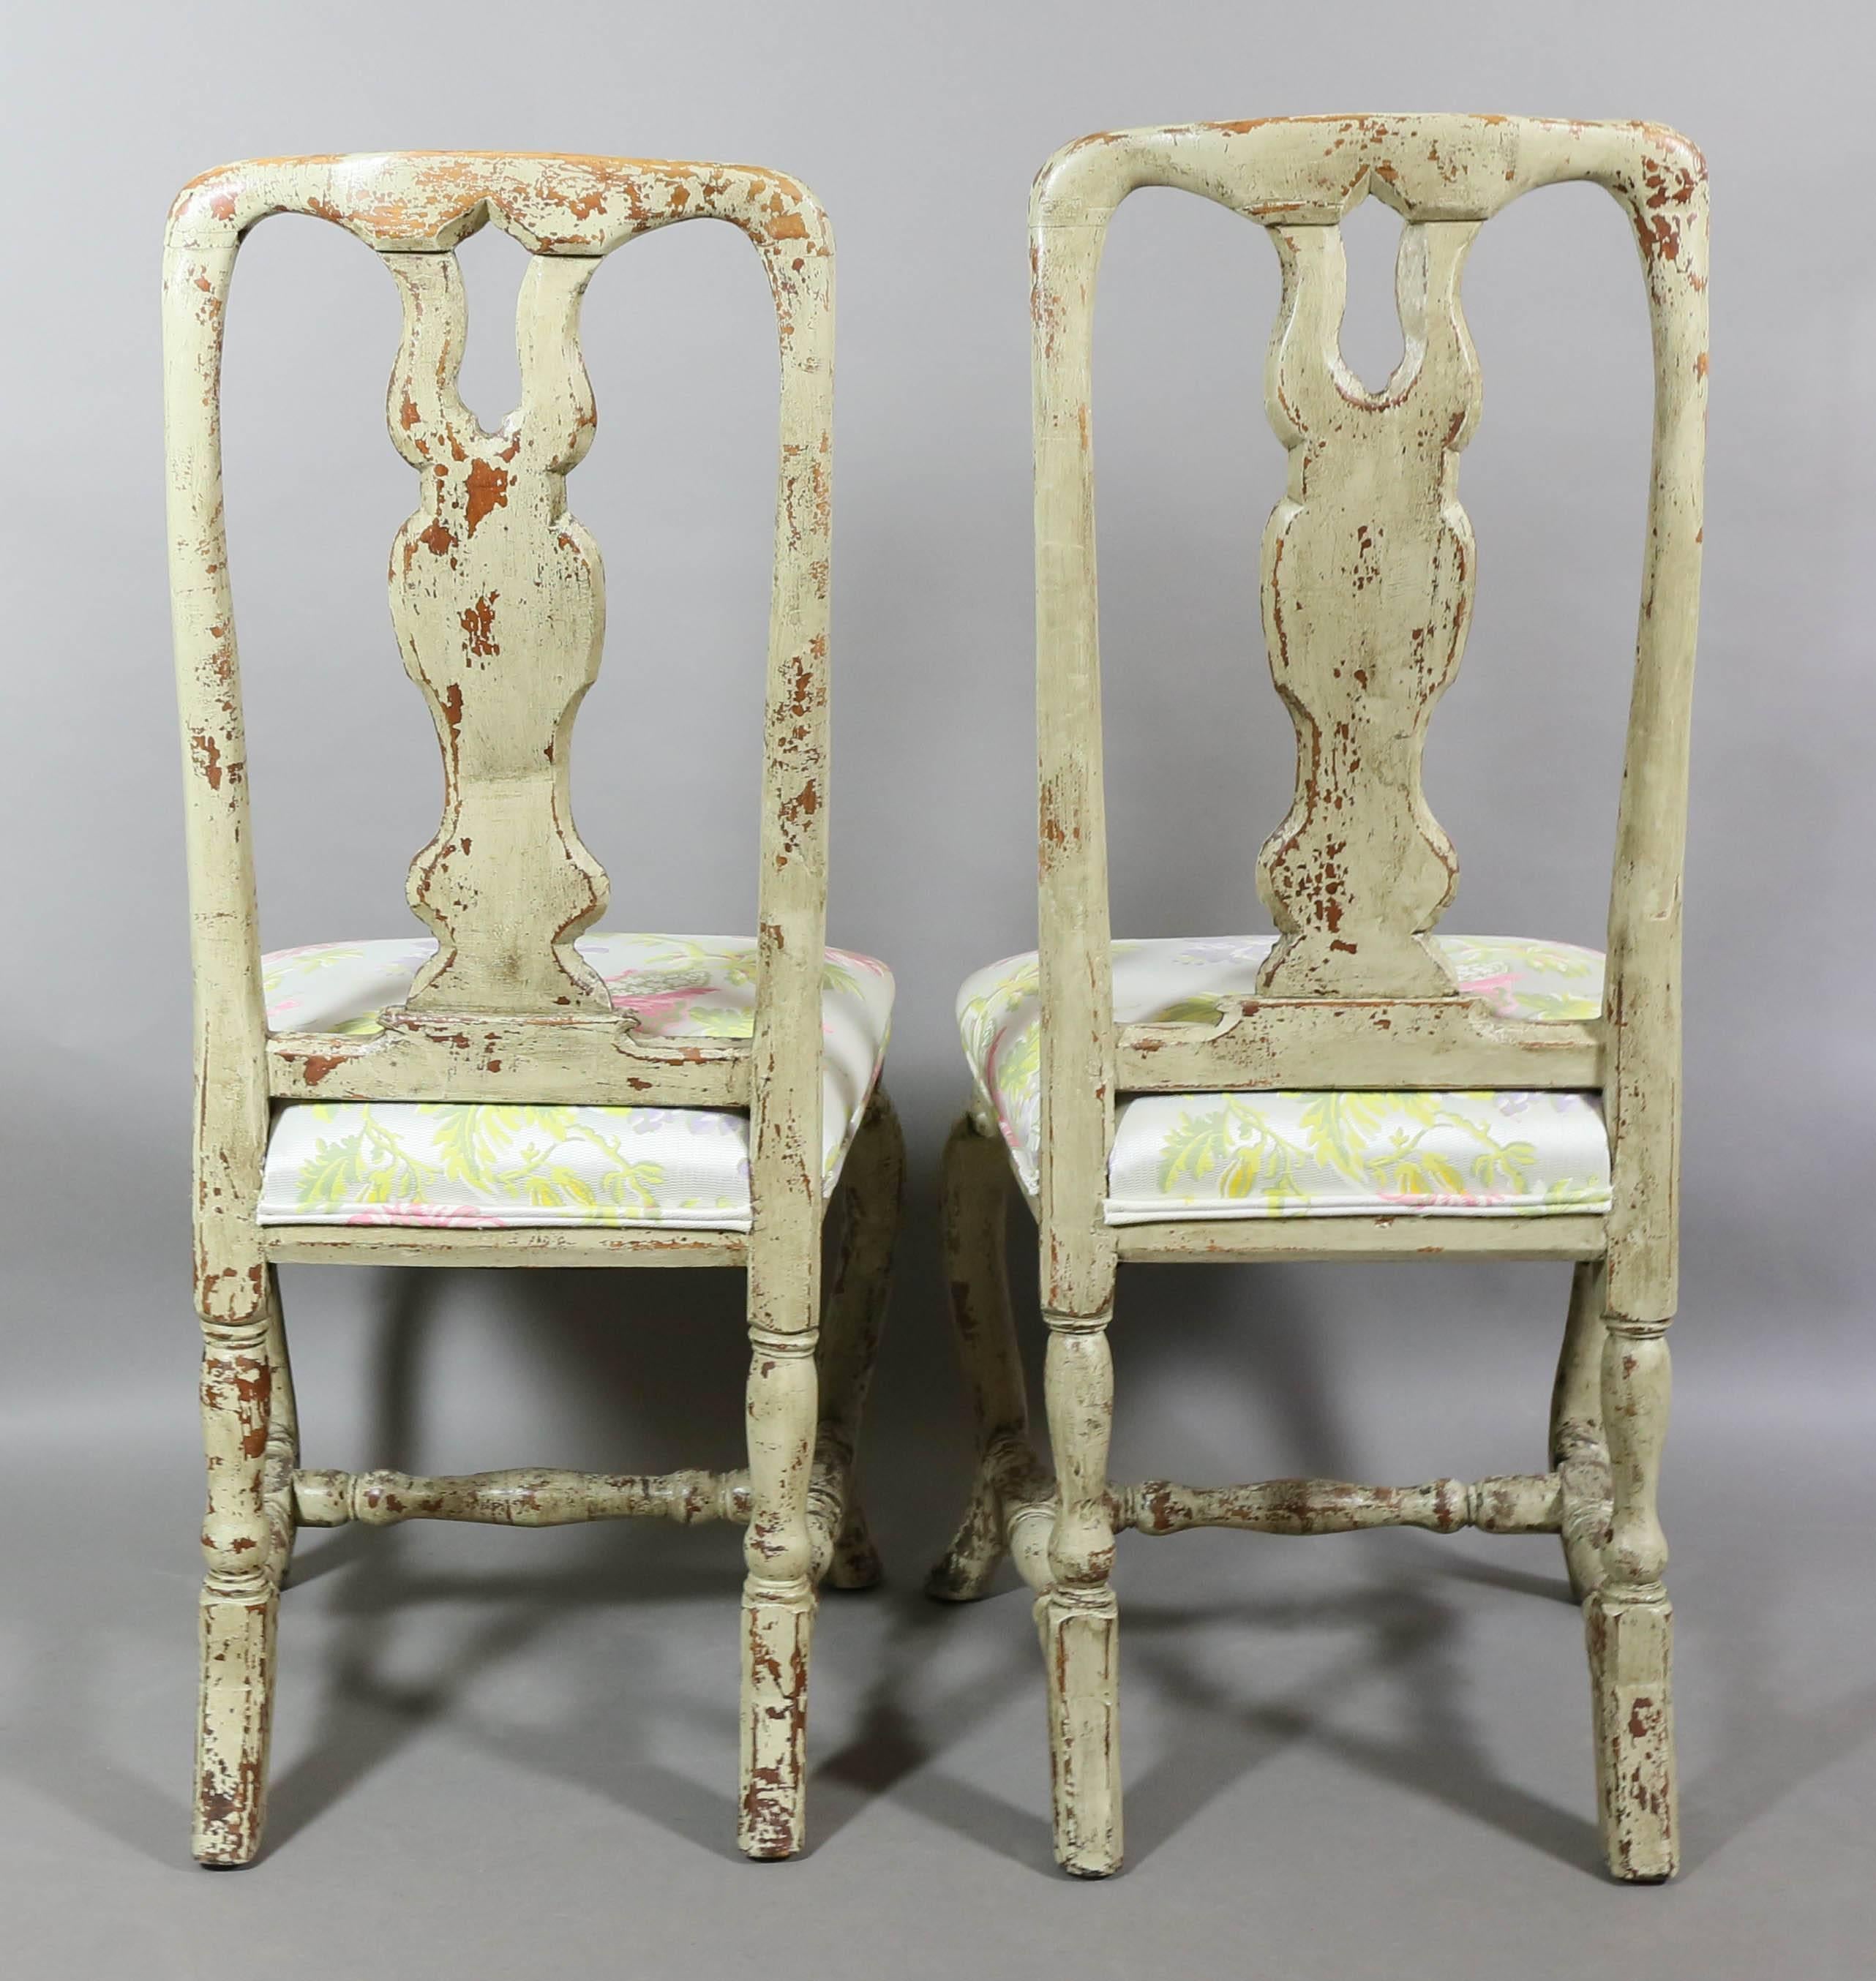 Mid-18th Century Pair of Swedish Rococo Painted Side Chairs